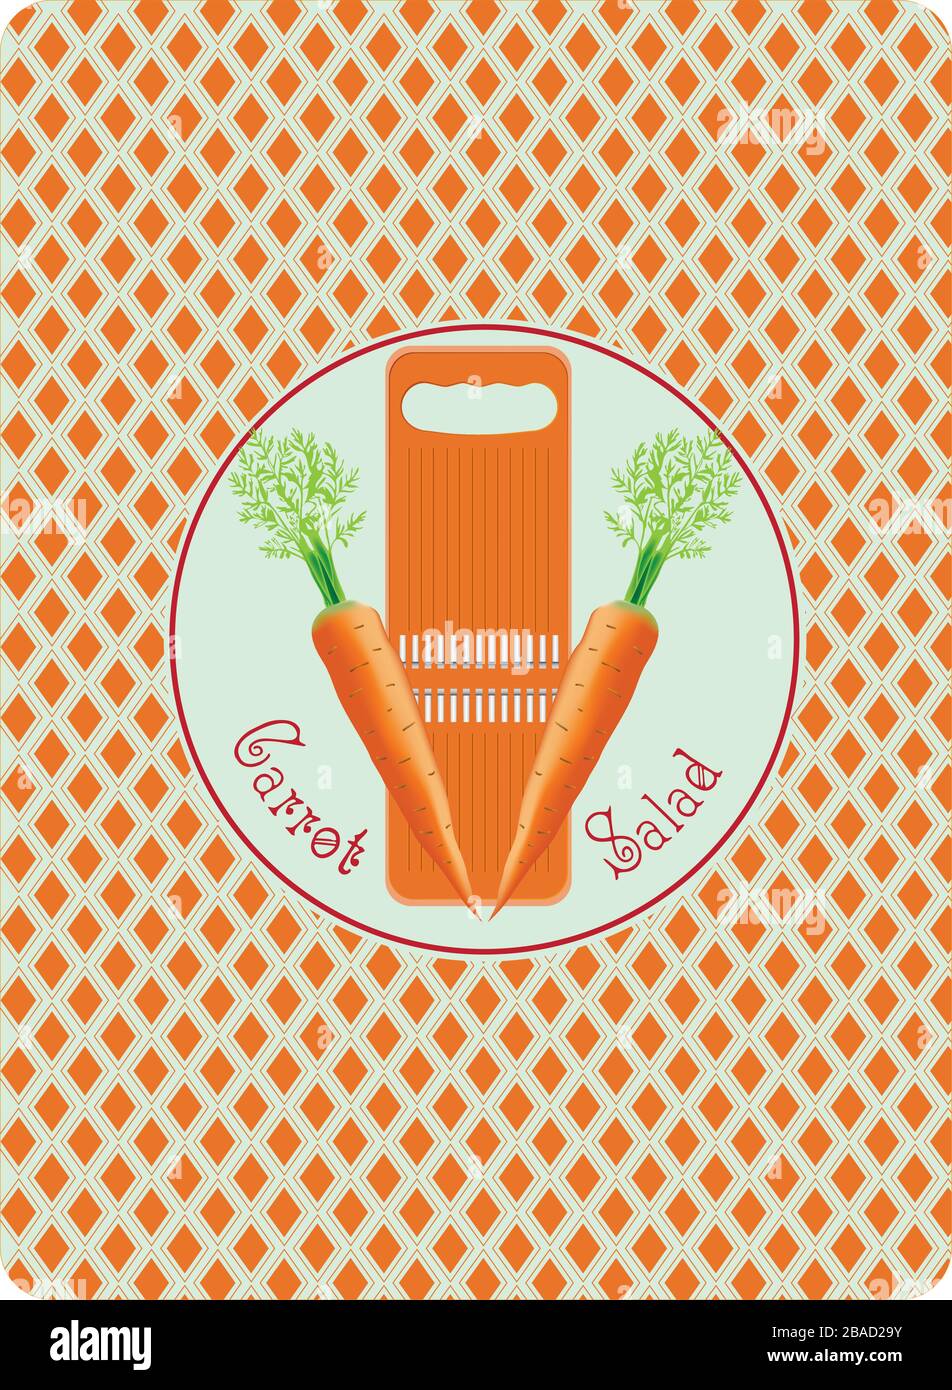 The carrot salad poster is in the shape of the back of a playing card. Illustrated carrots and grater for chopping carrots. Stock Vector